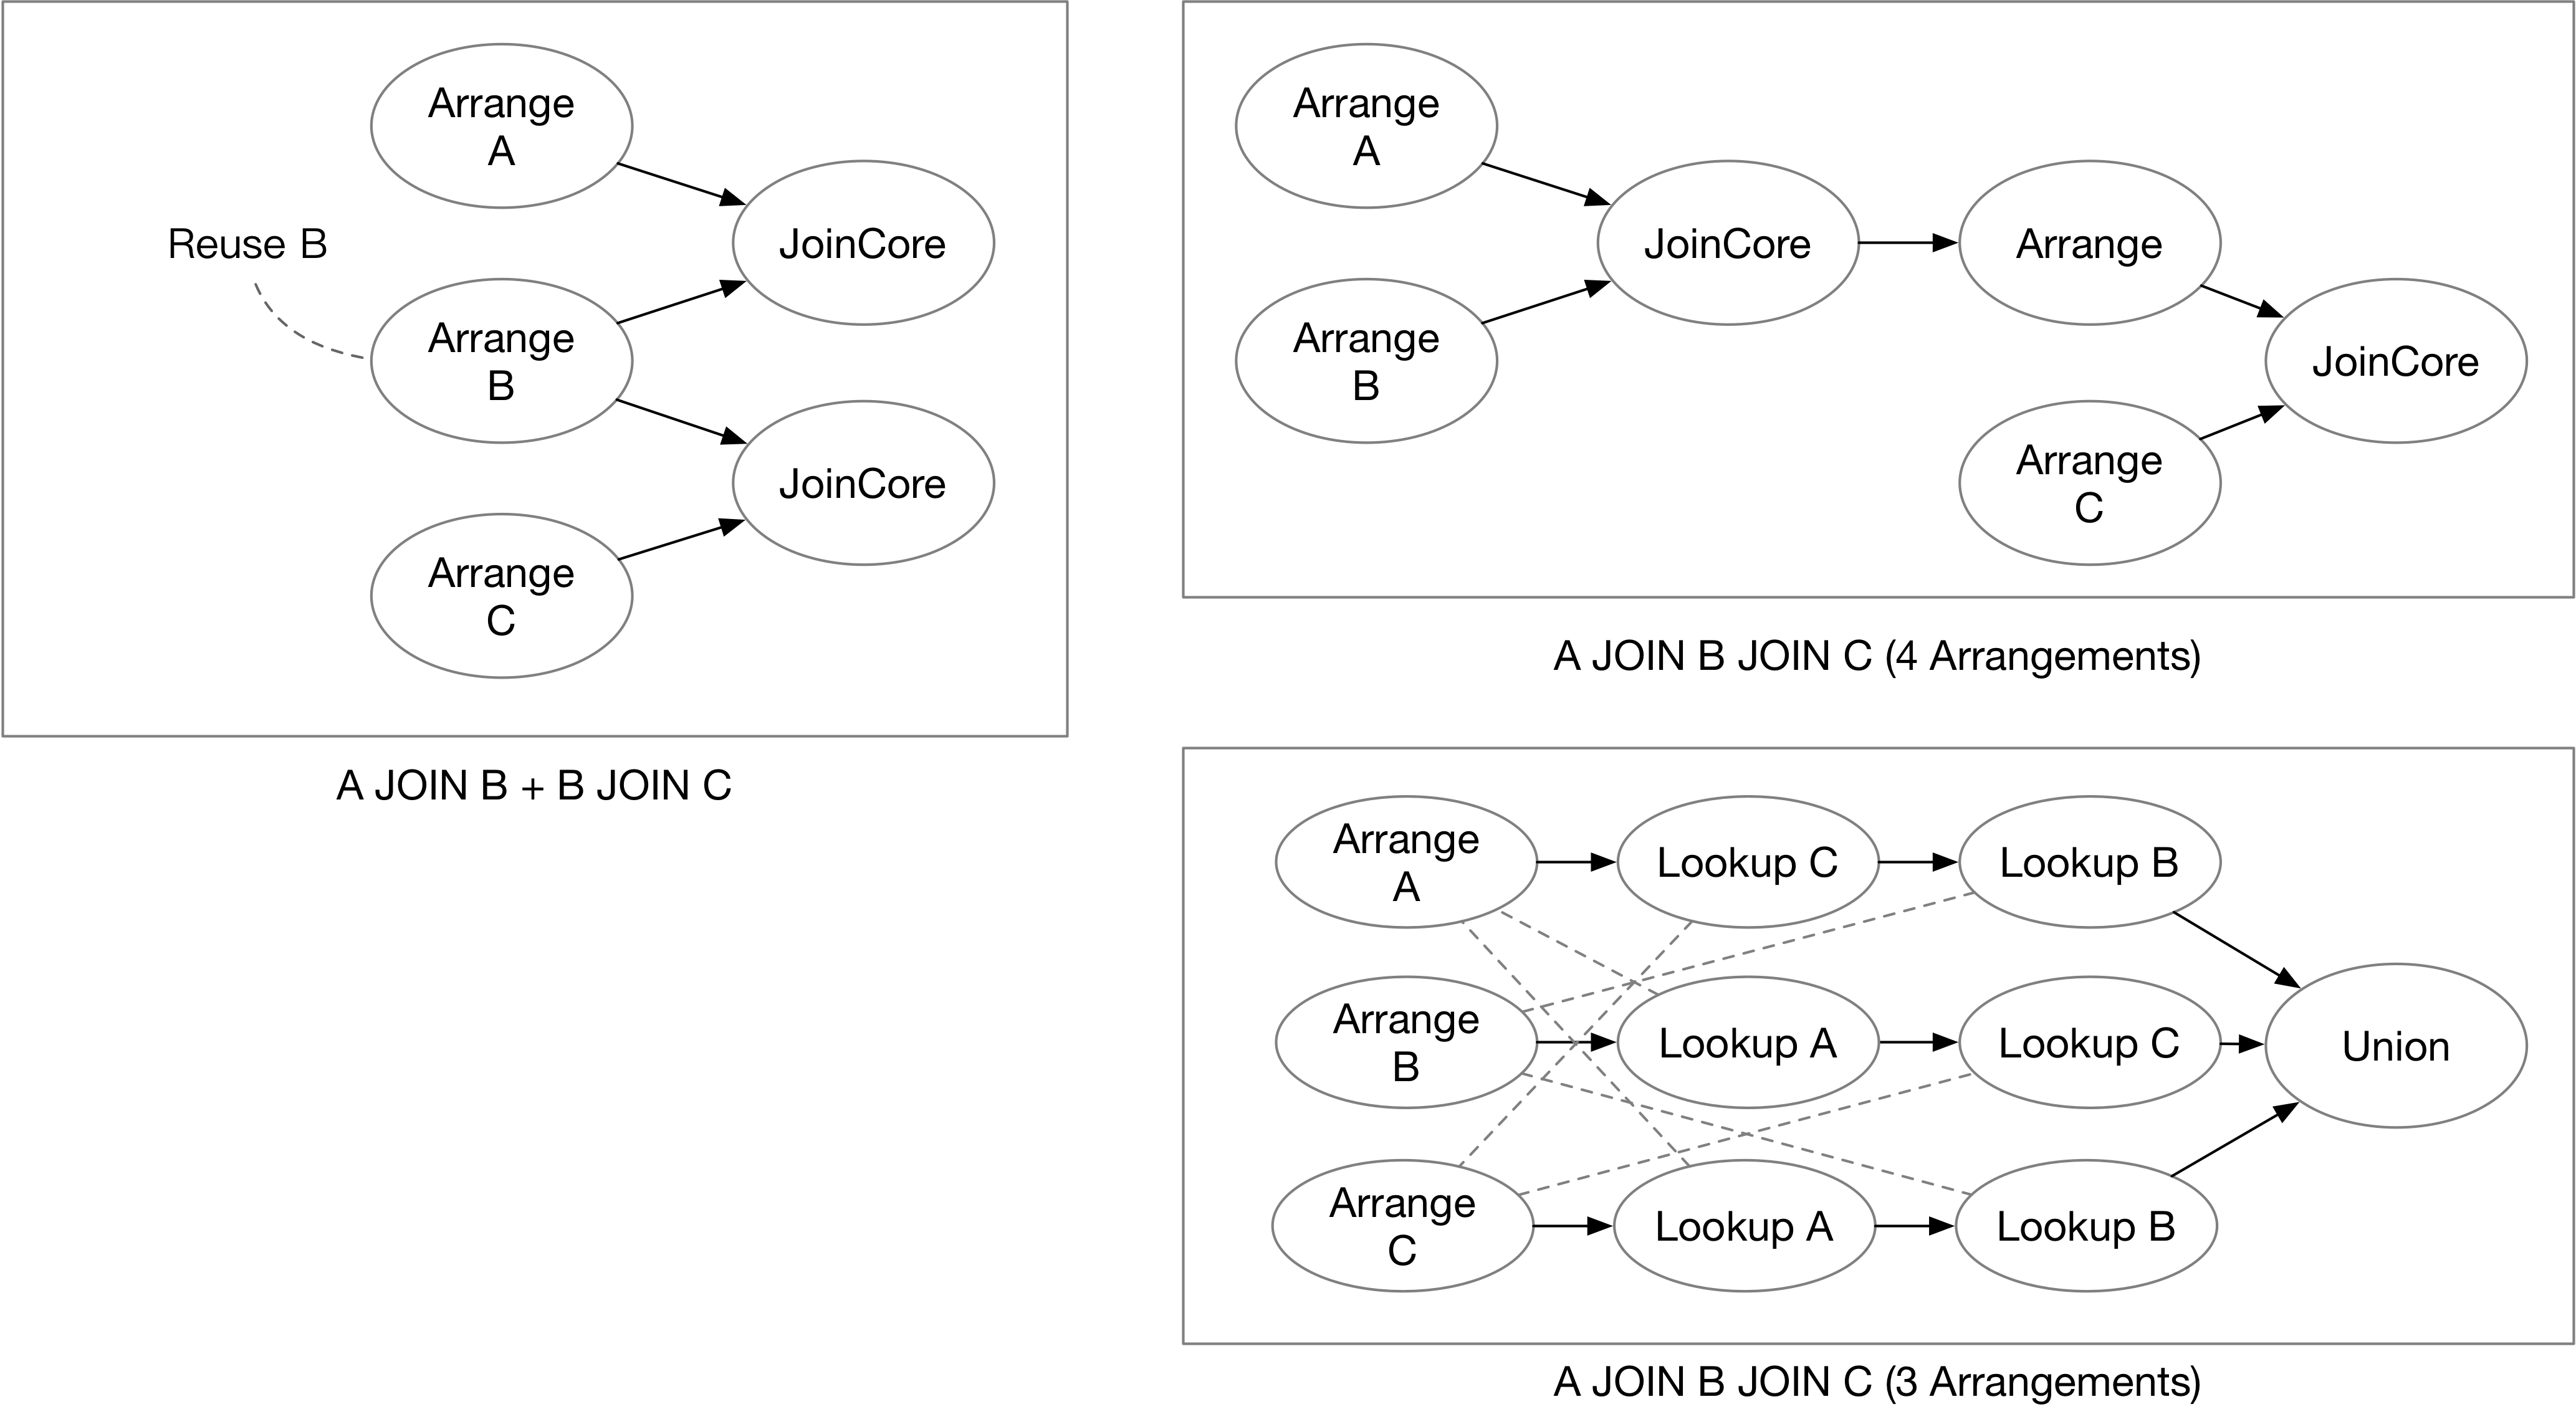 3-way join of differential dataflow